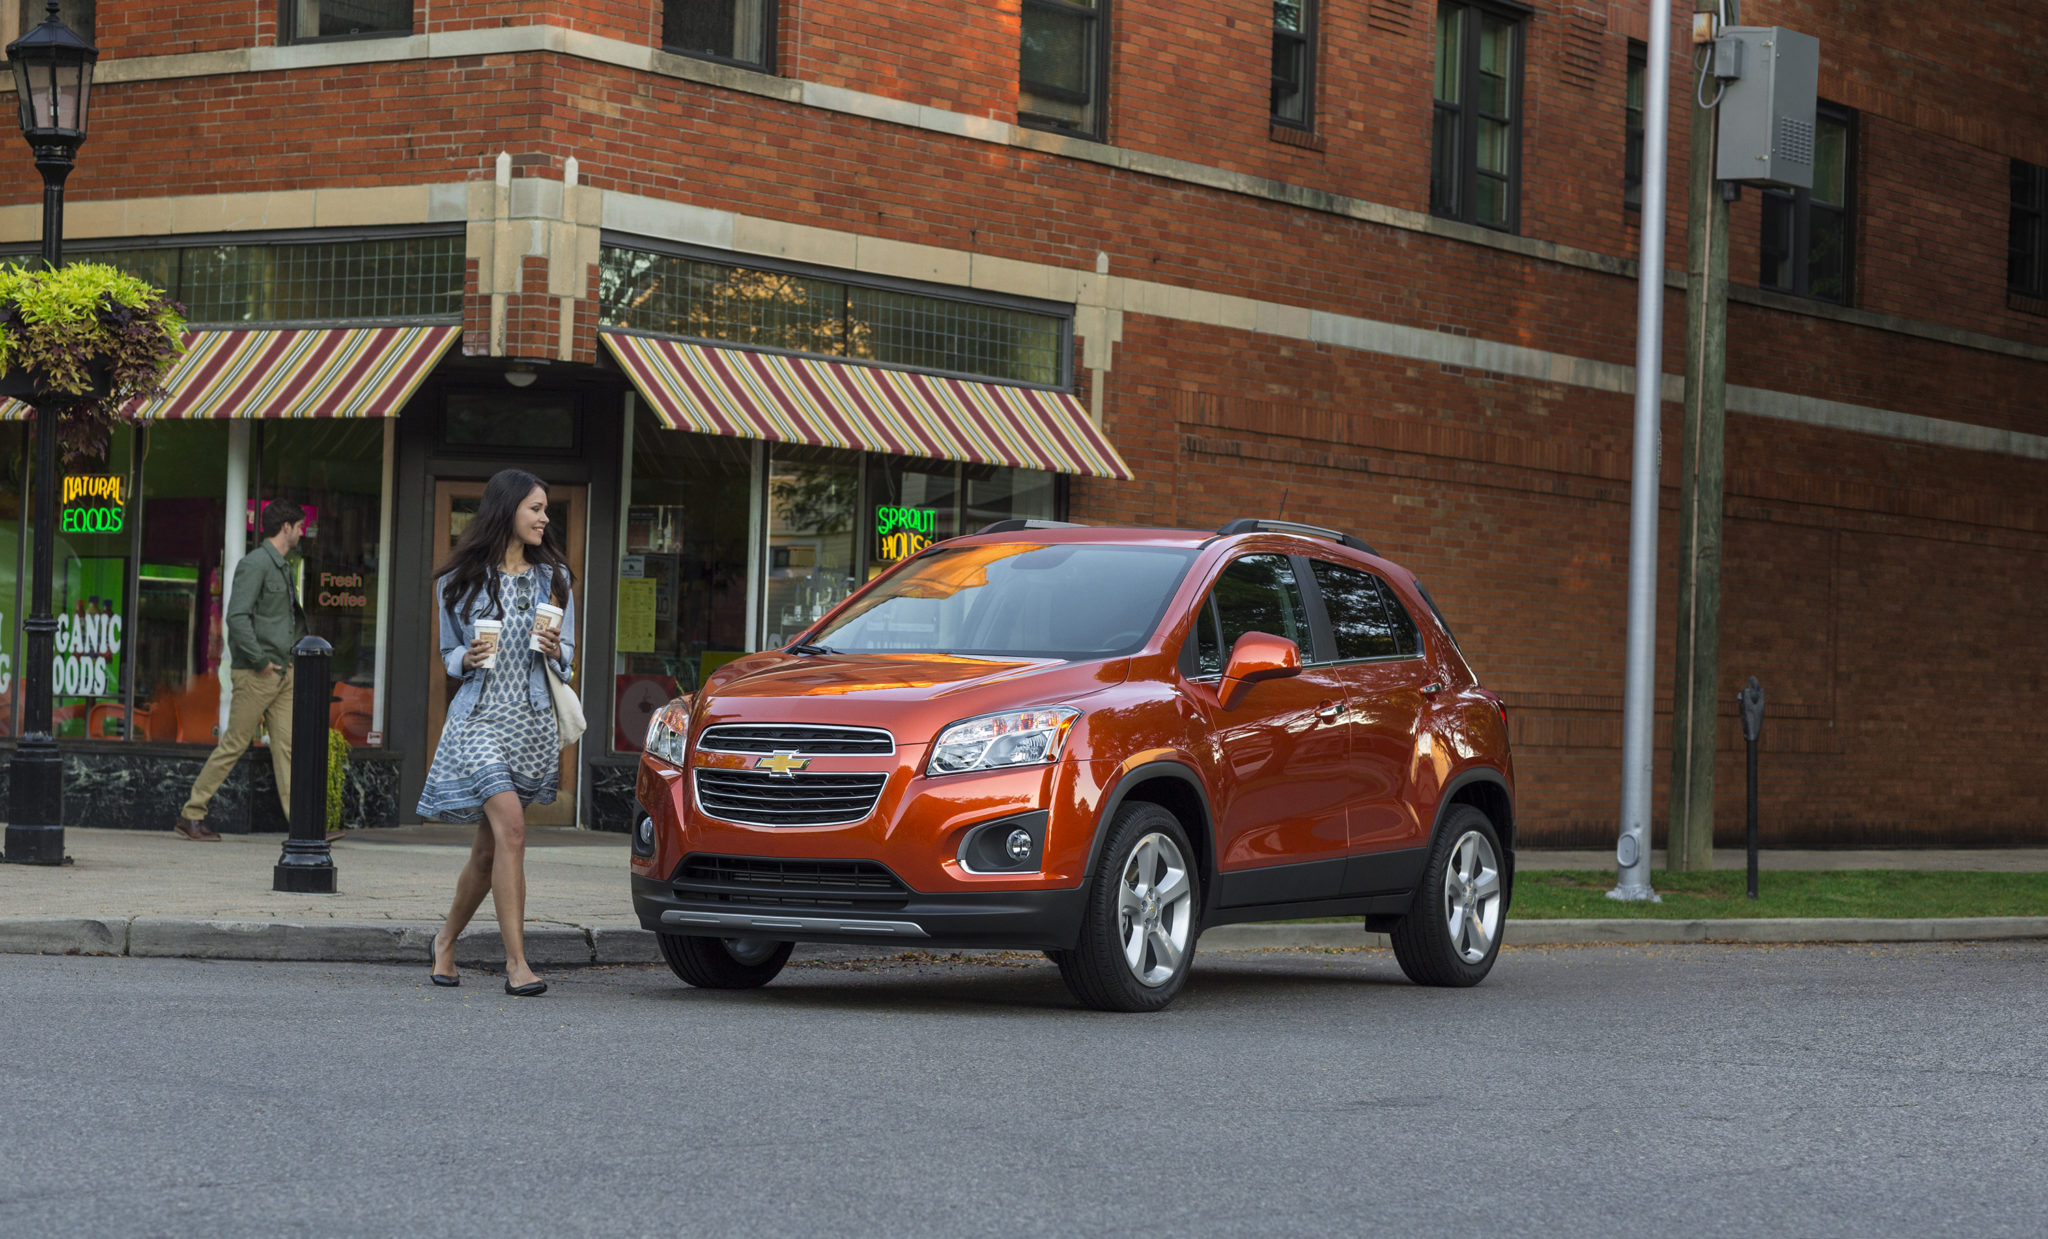 2015 chevy trax price new in 2015